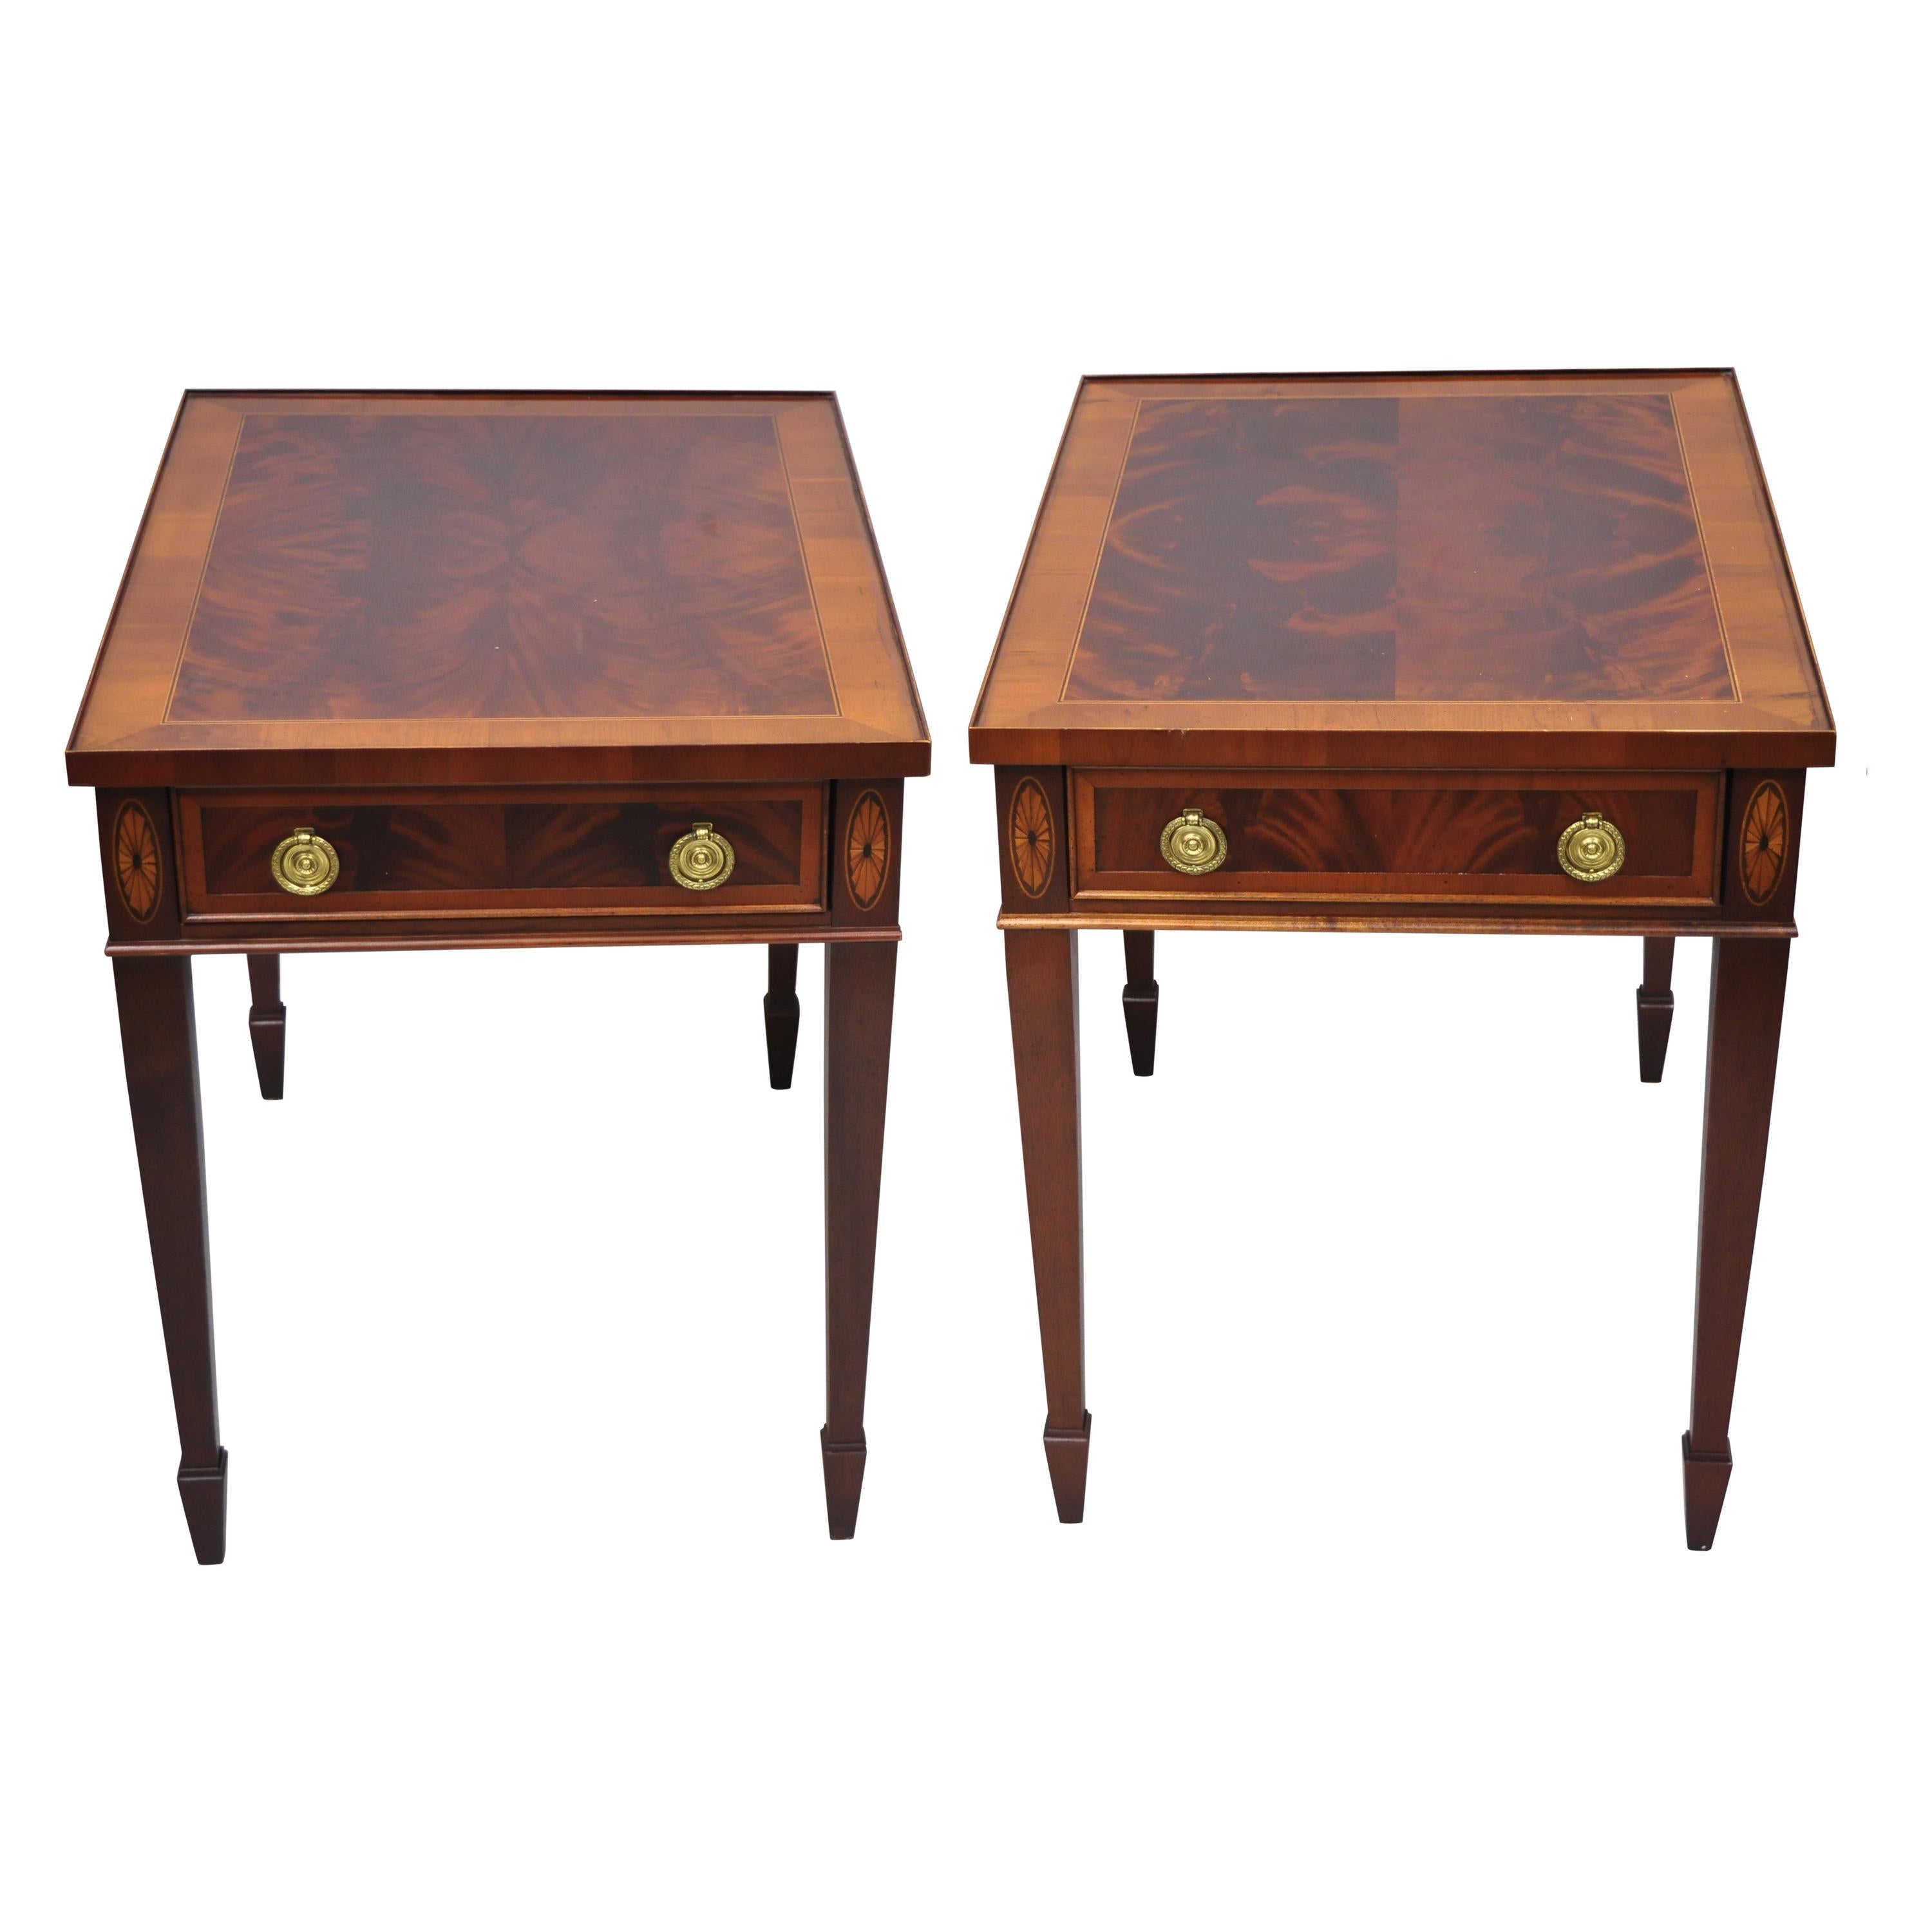 Pair of Crotch Flame Mahogany Sheraton Federal Style Hekman End Tables